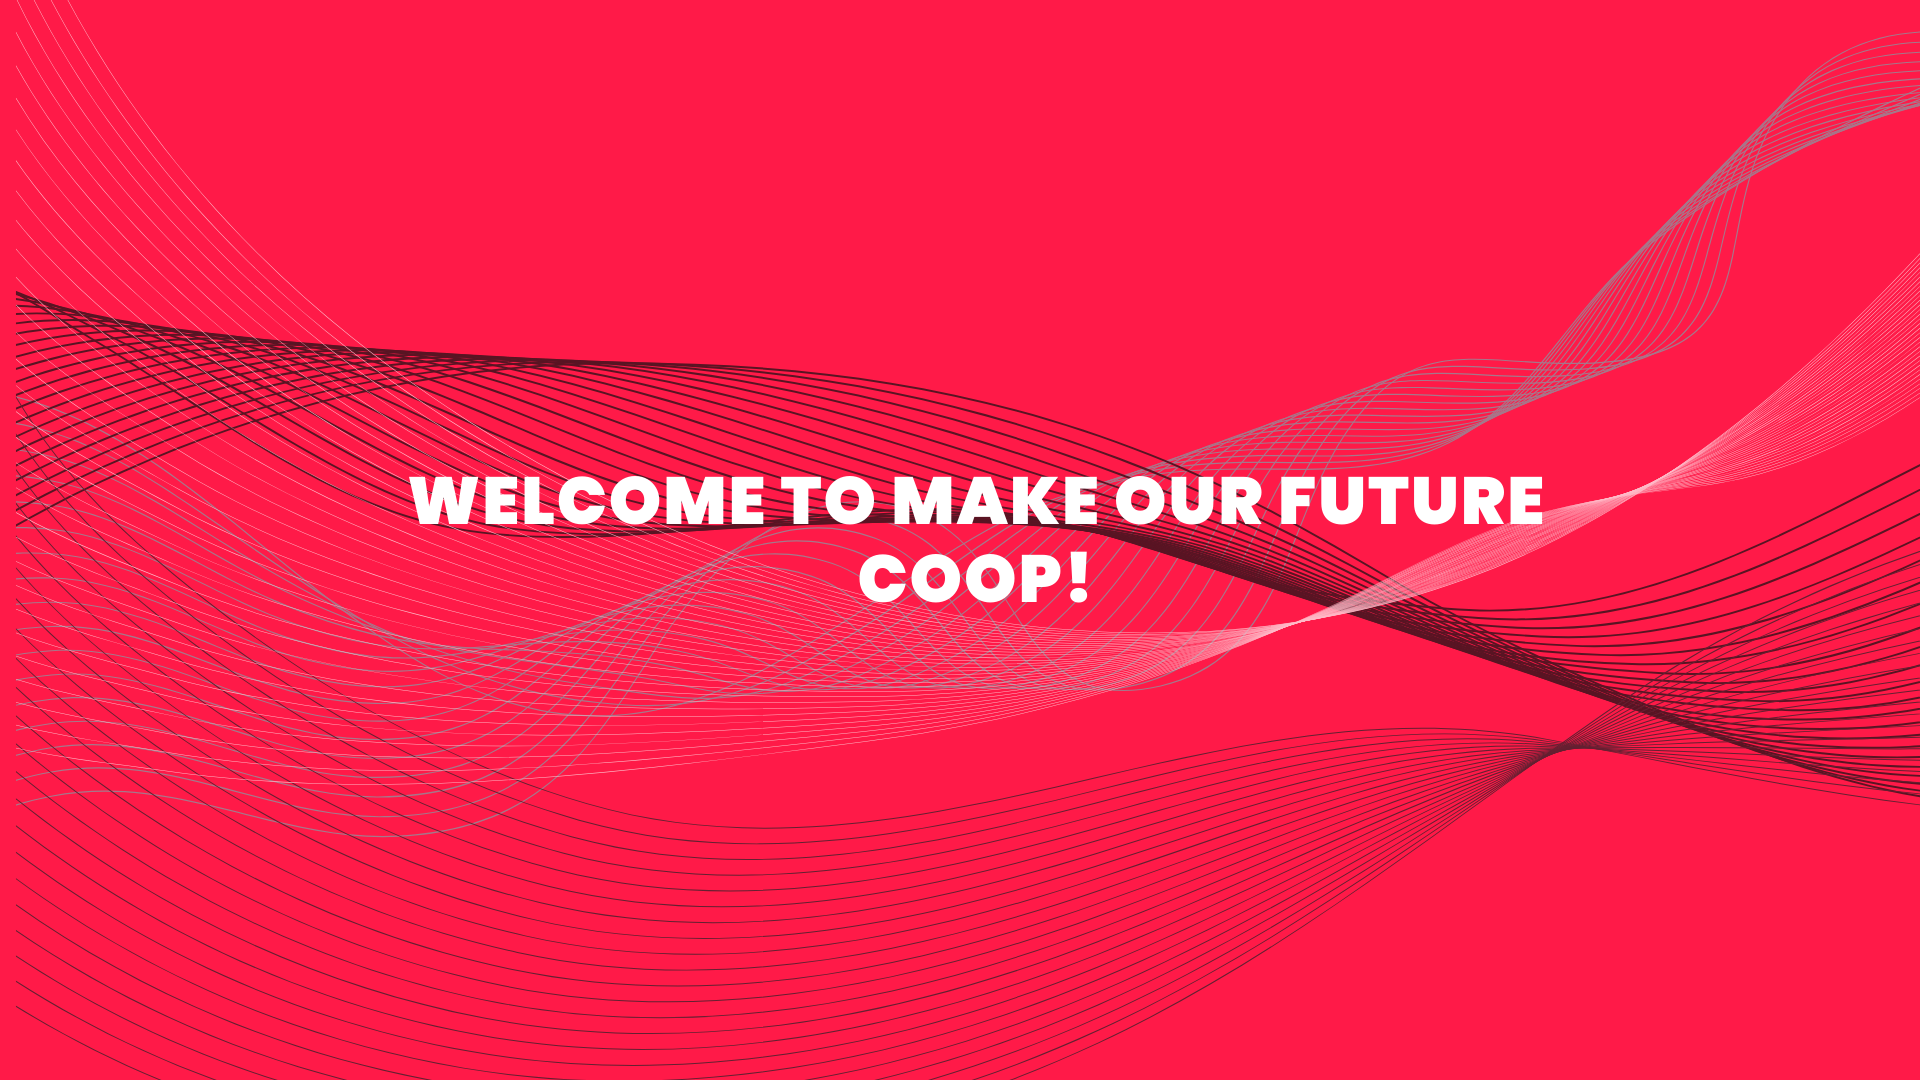 Welcome to Make Our Future Coop!